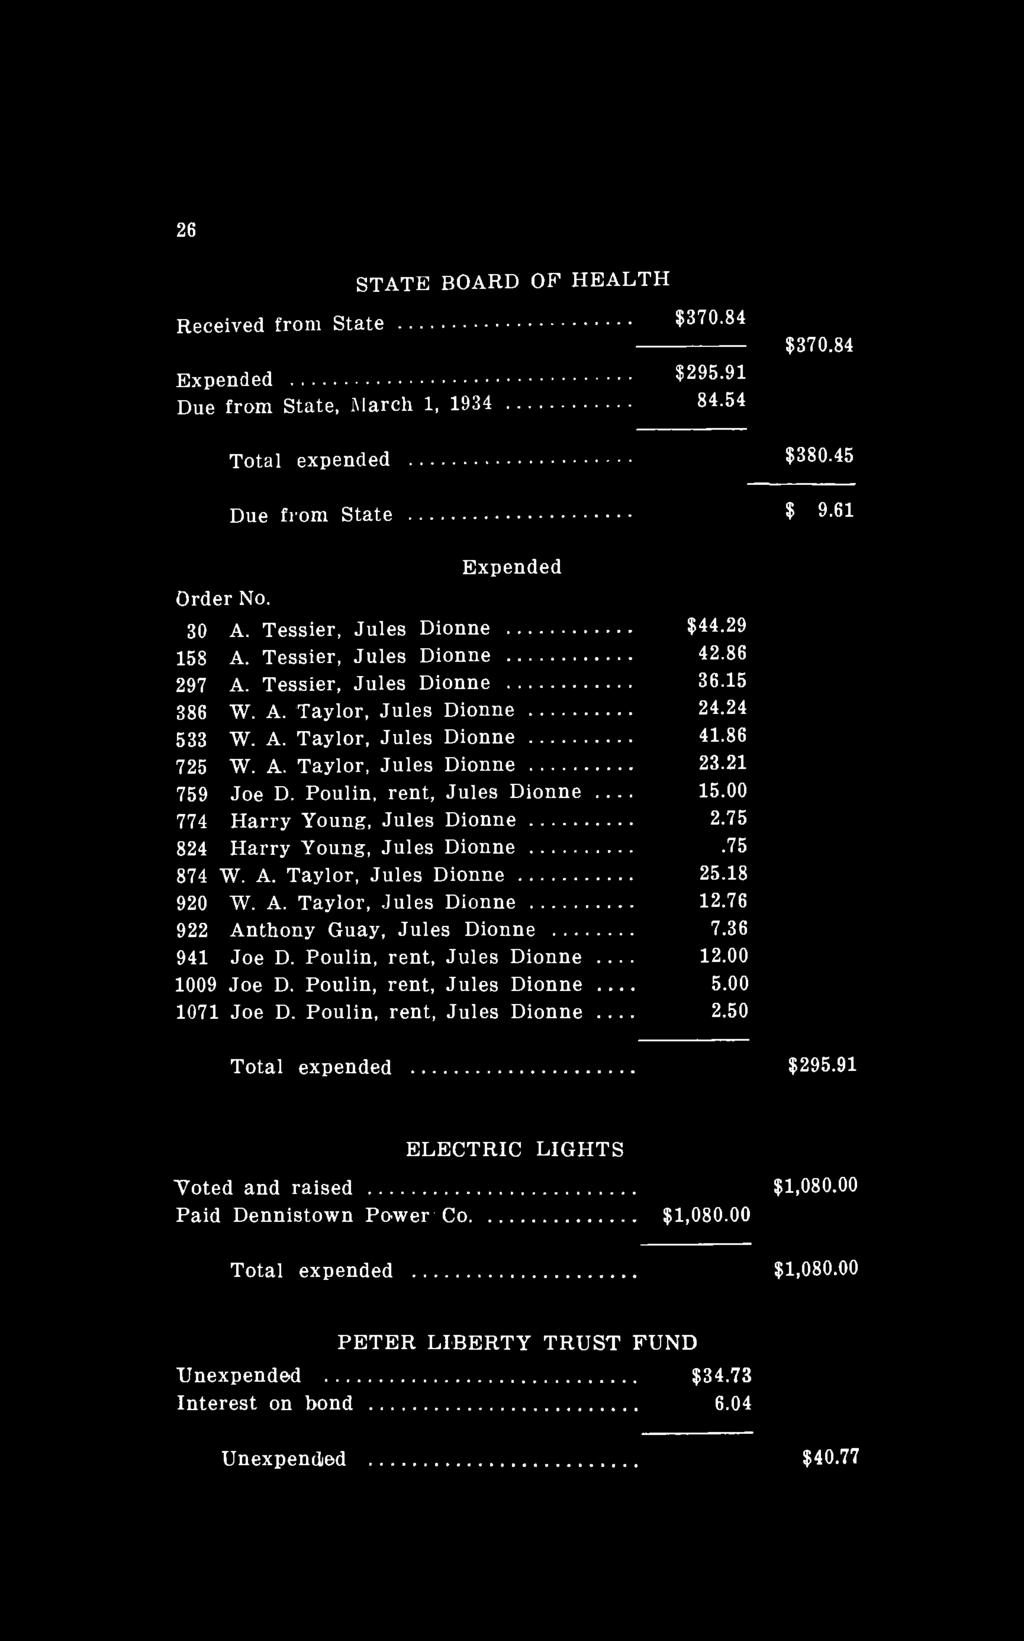 26 STATE BOARD OF HEALTH Received from State $370.84 Expended $295.91 Due from State, March 1, 1934 84.54 $370.84 Total expended $380.45 Due from State $ 9-61 Order No. Expended 30 A.